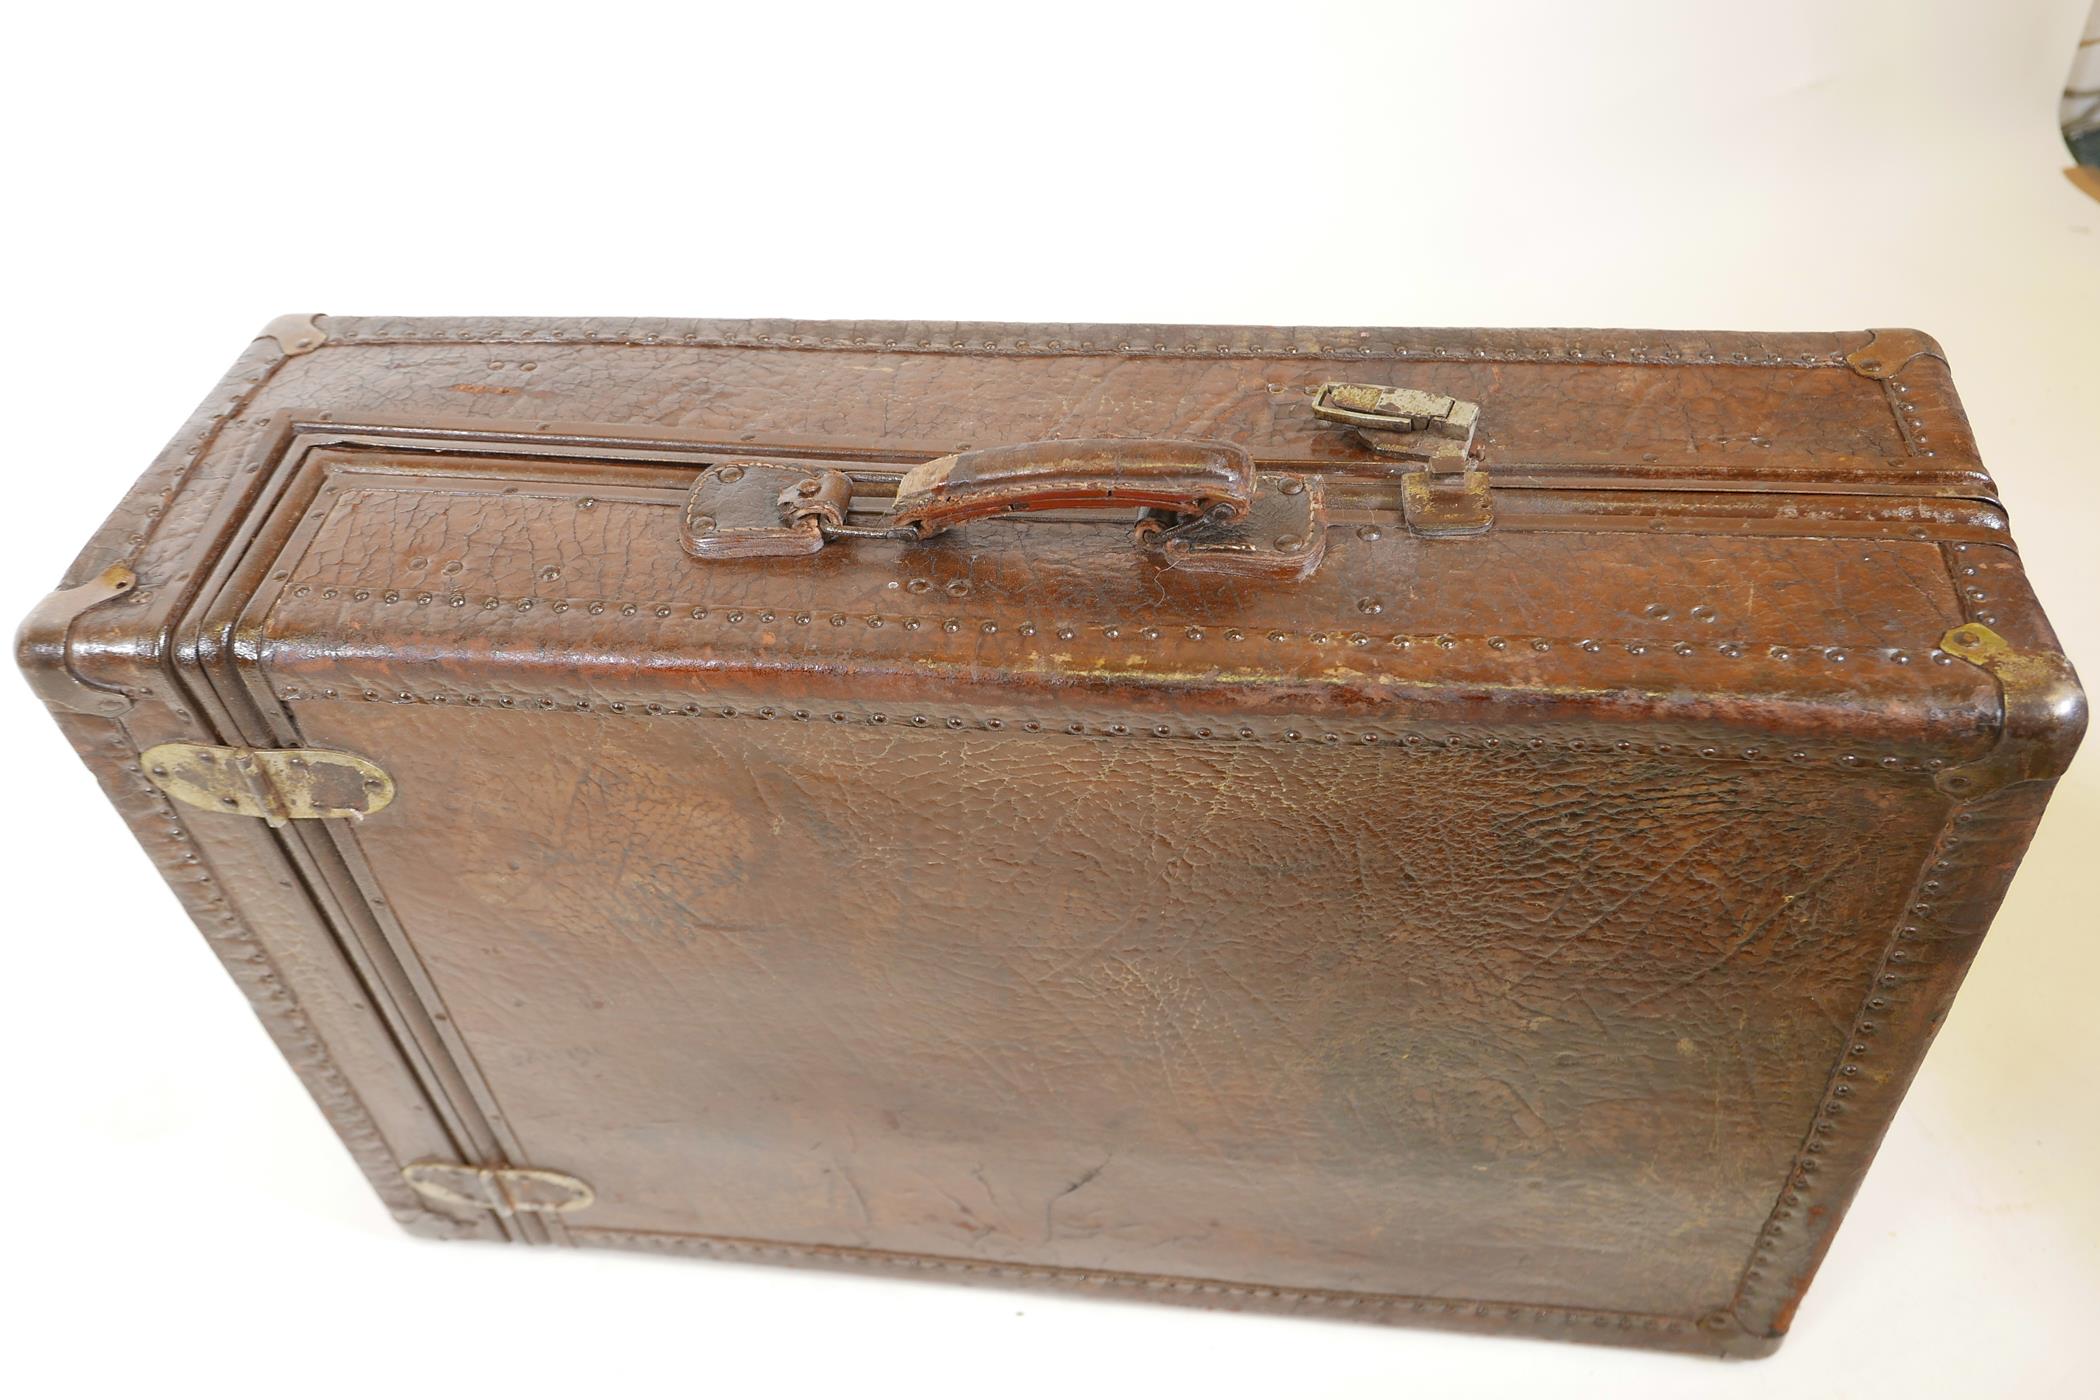 A vintage leather travel case with a fitted interior, and two other vintage cases, largest 30" x 19" - Image 8 of 8